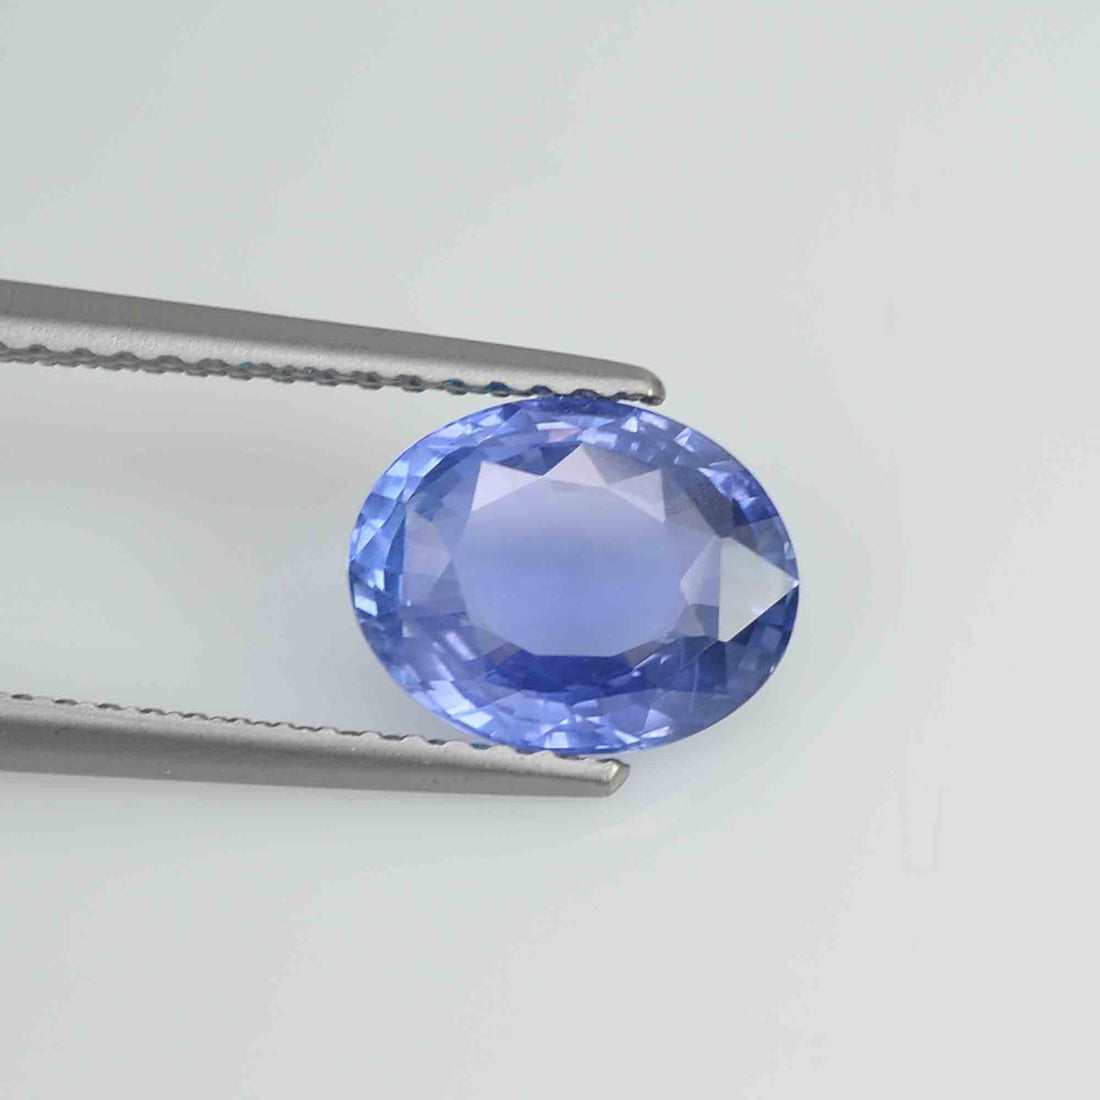 2.26 cts Unheated Natural Blue Sapphire Loose Gemstone Oval Cut